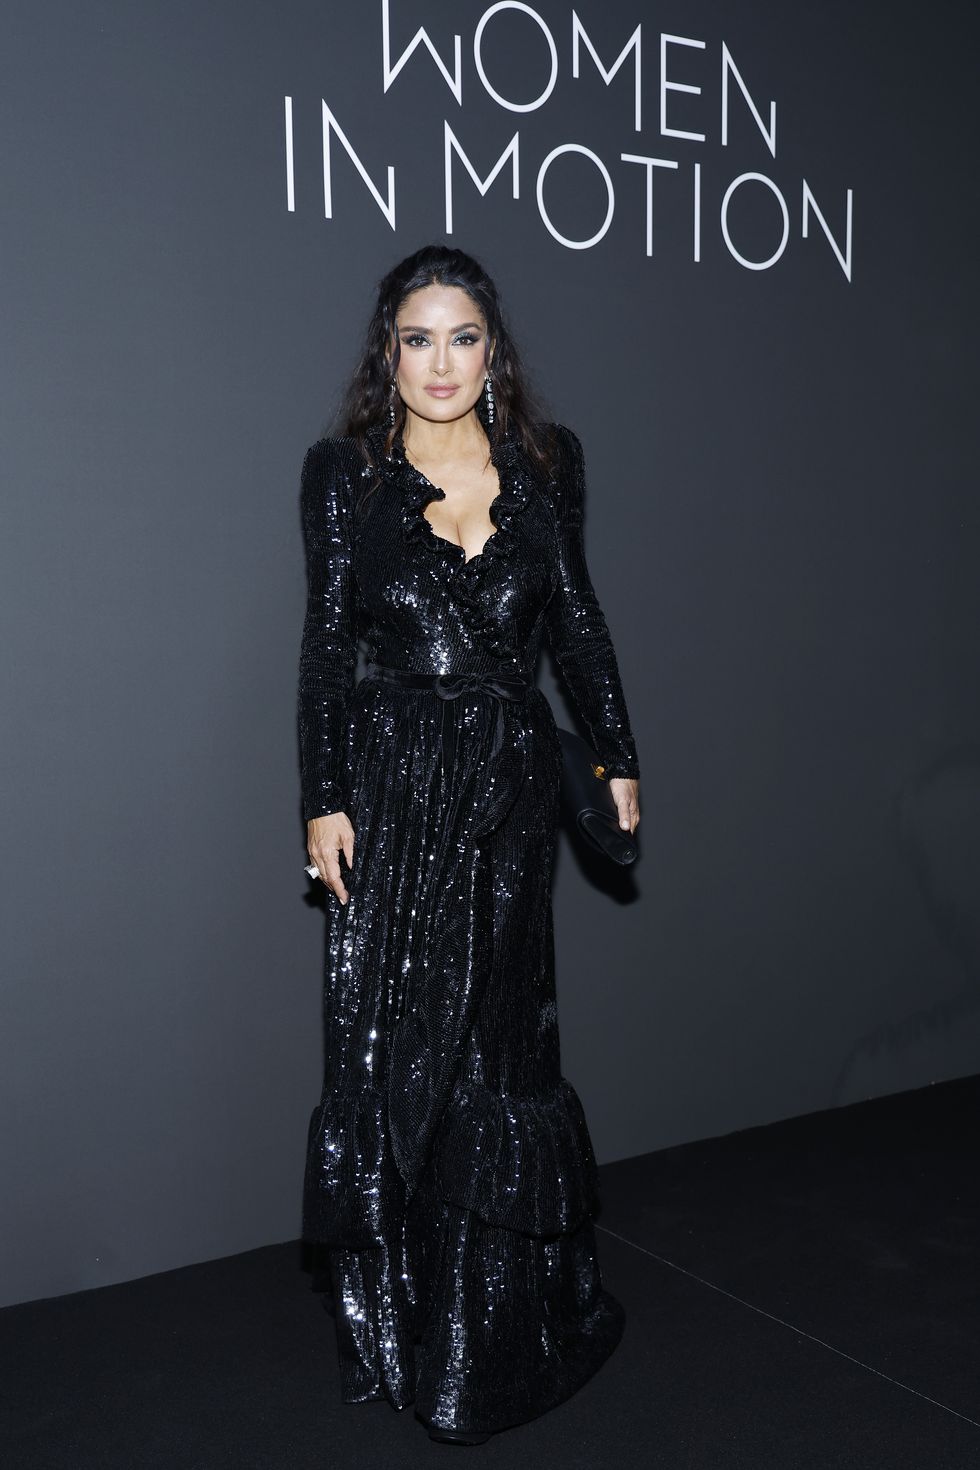 Kering Women in Motion Honors Michelle Yeoh at Cannes